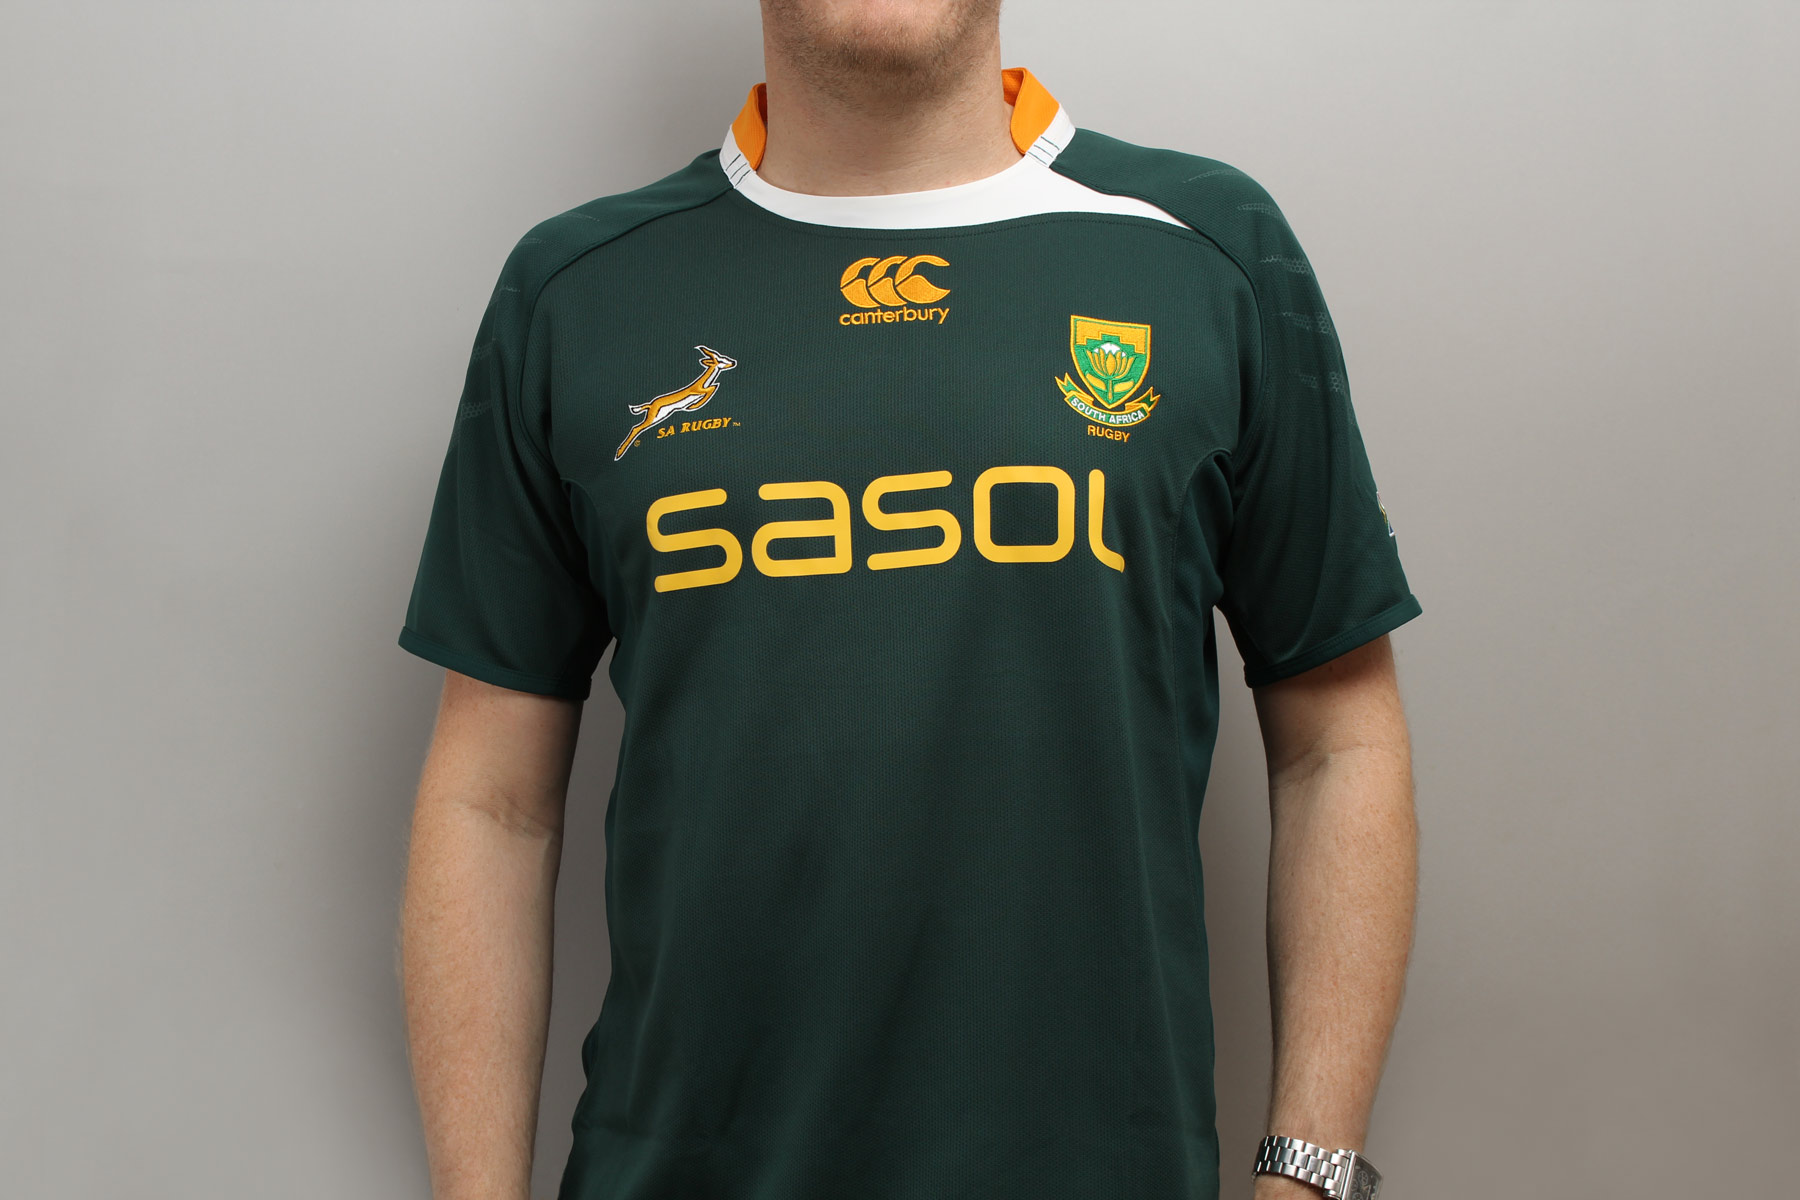 Sasol, although a massive multinational, has its origins in South Africa. Turn the TV channel to any international rugby game and you will see their sponsorship emblazoned across the South African kit.